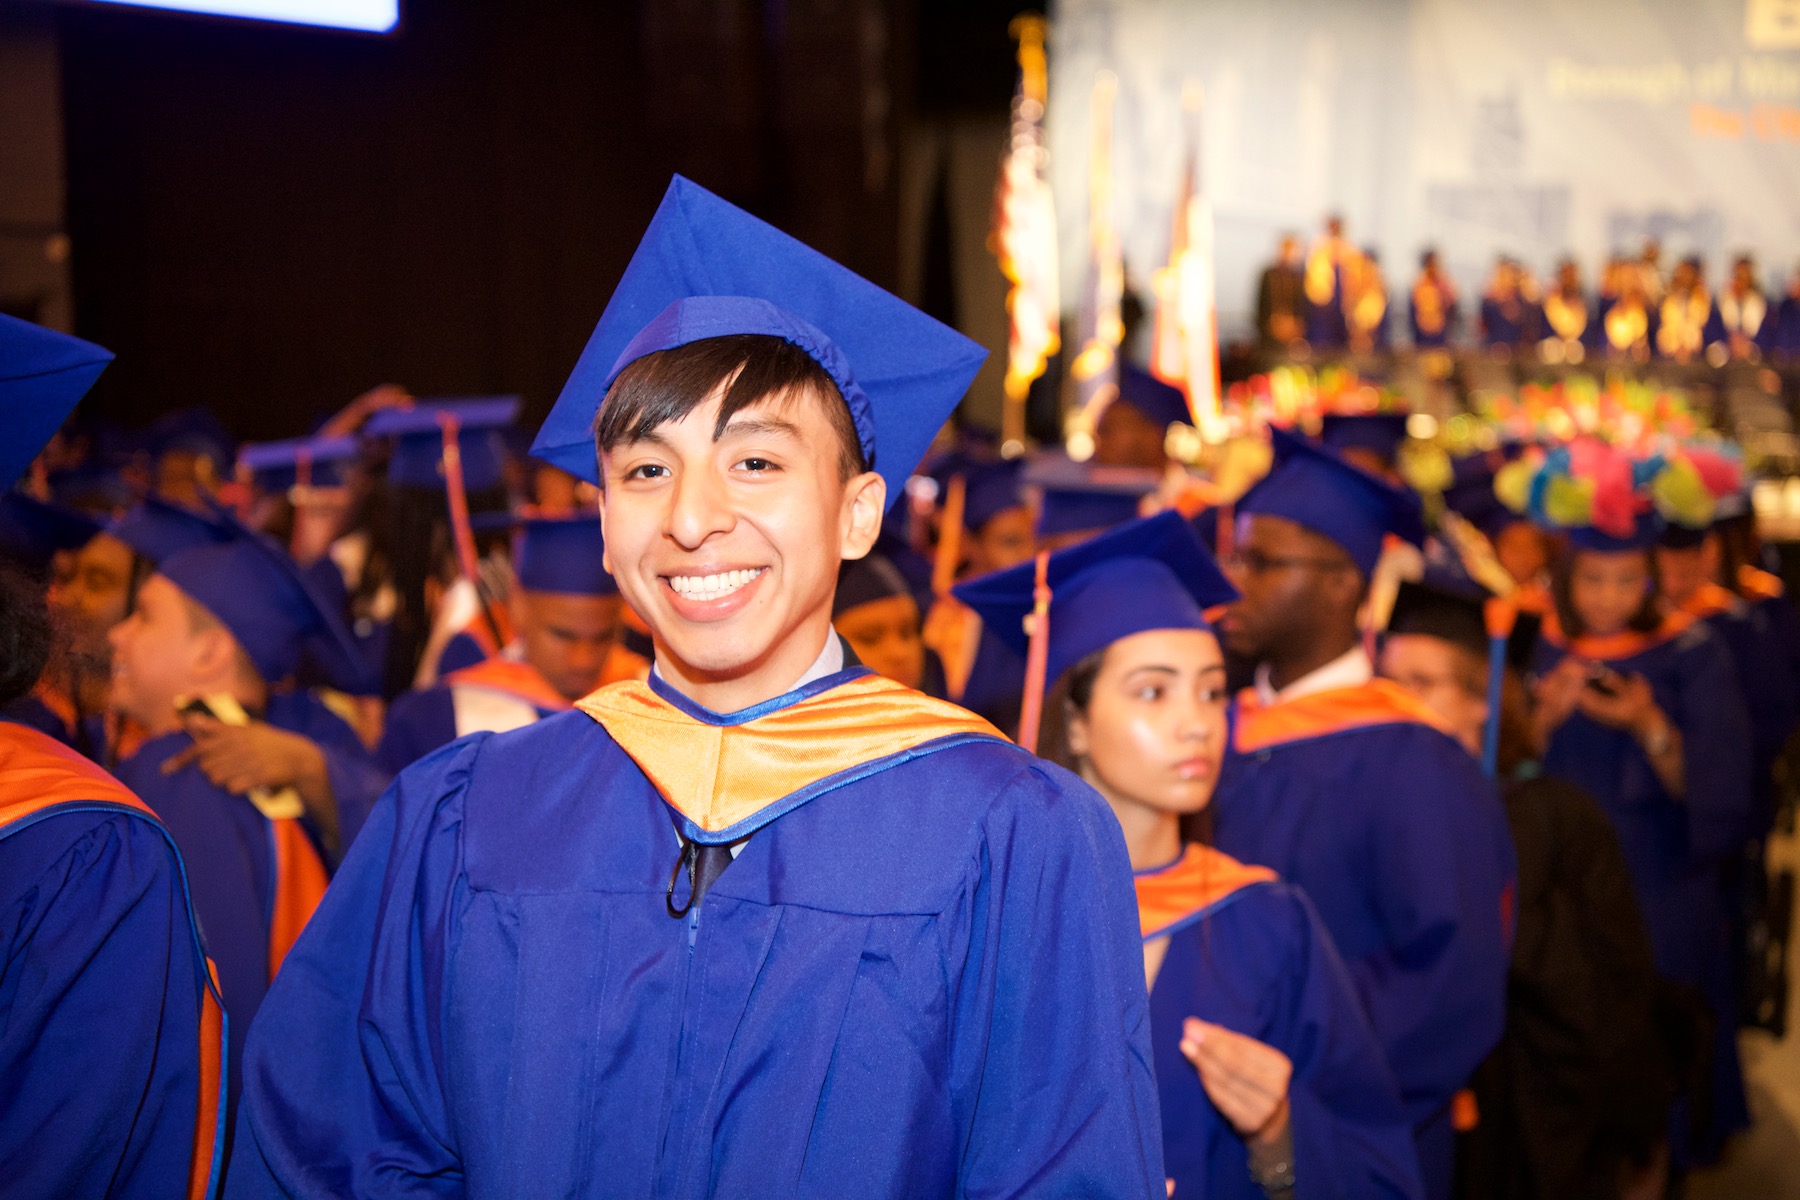 In Fall 2020, BMCC reported that 40% of the student population is Hispanic.